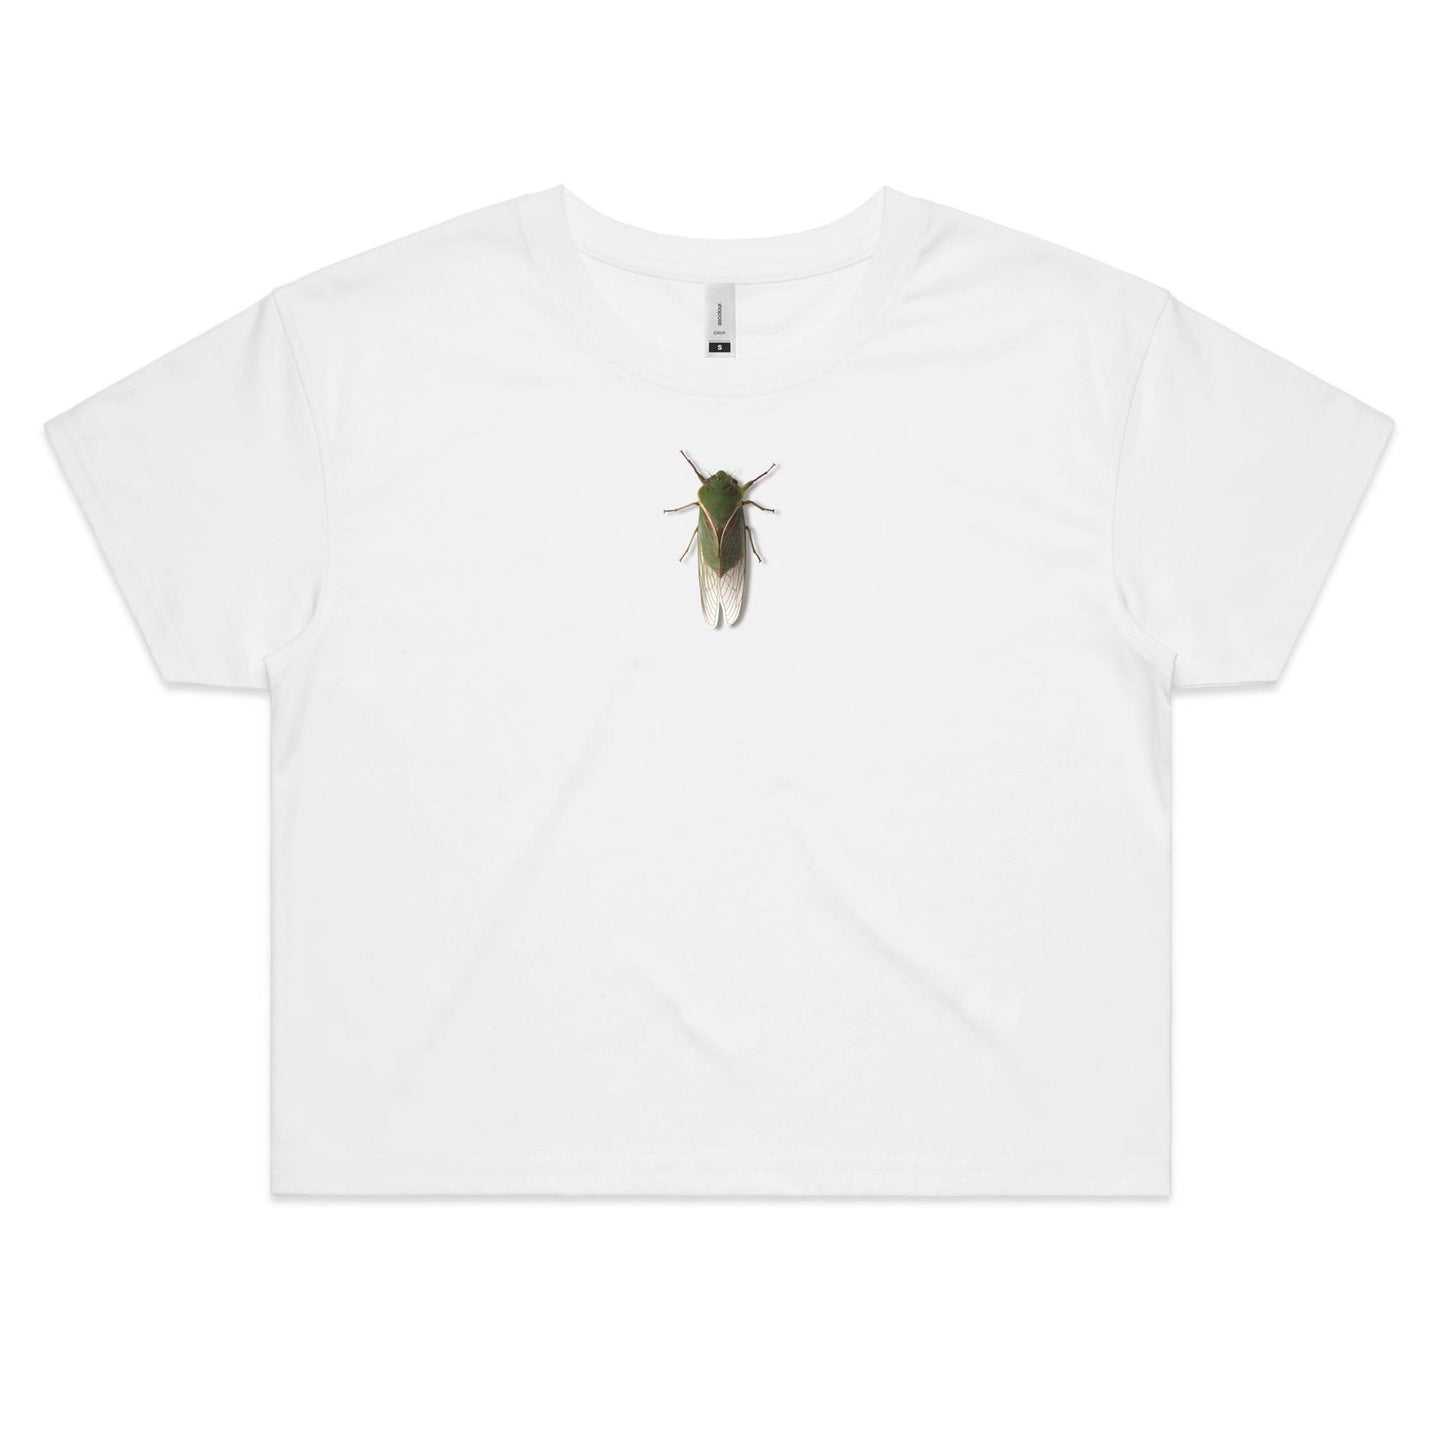 The Little Guy Crop T Shirts for Women